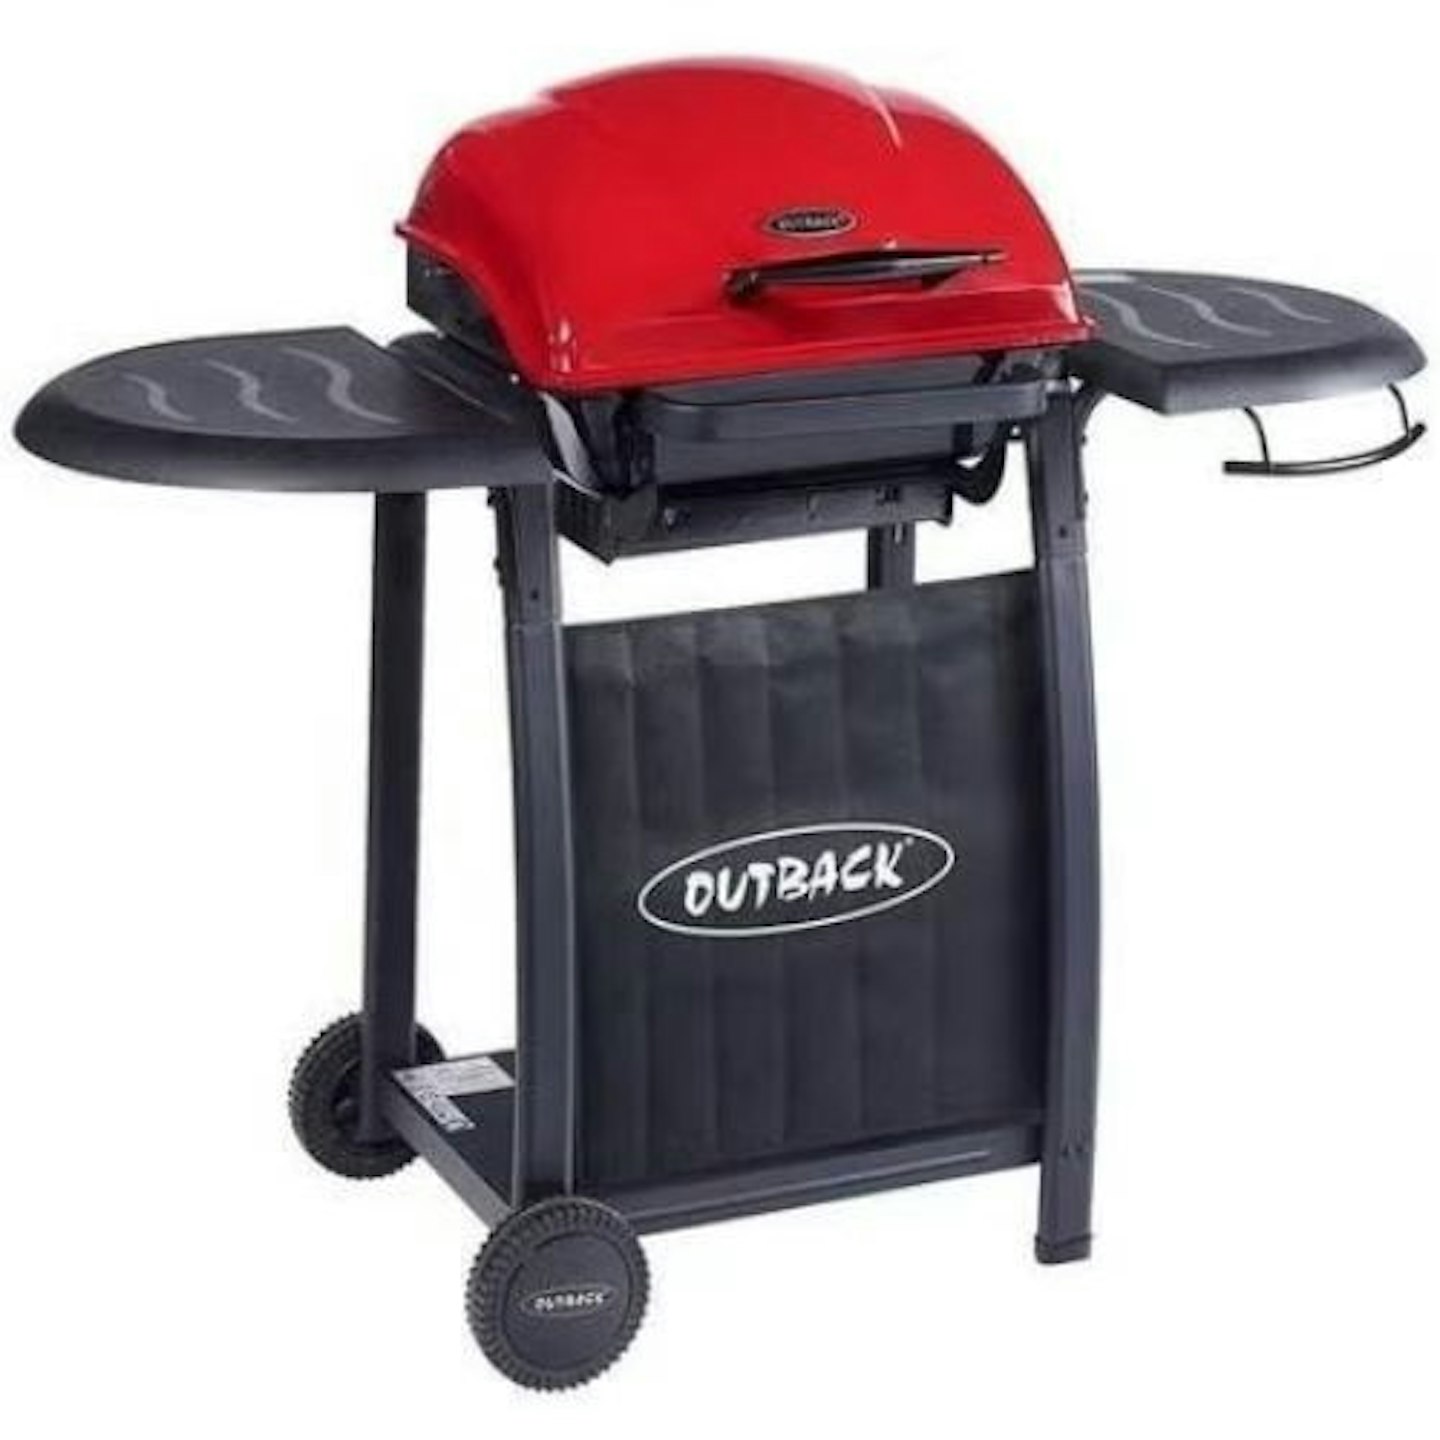 Outback Omega 201 Charcoal BBQ Grill